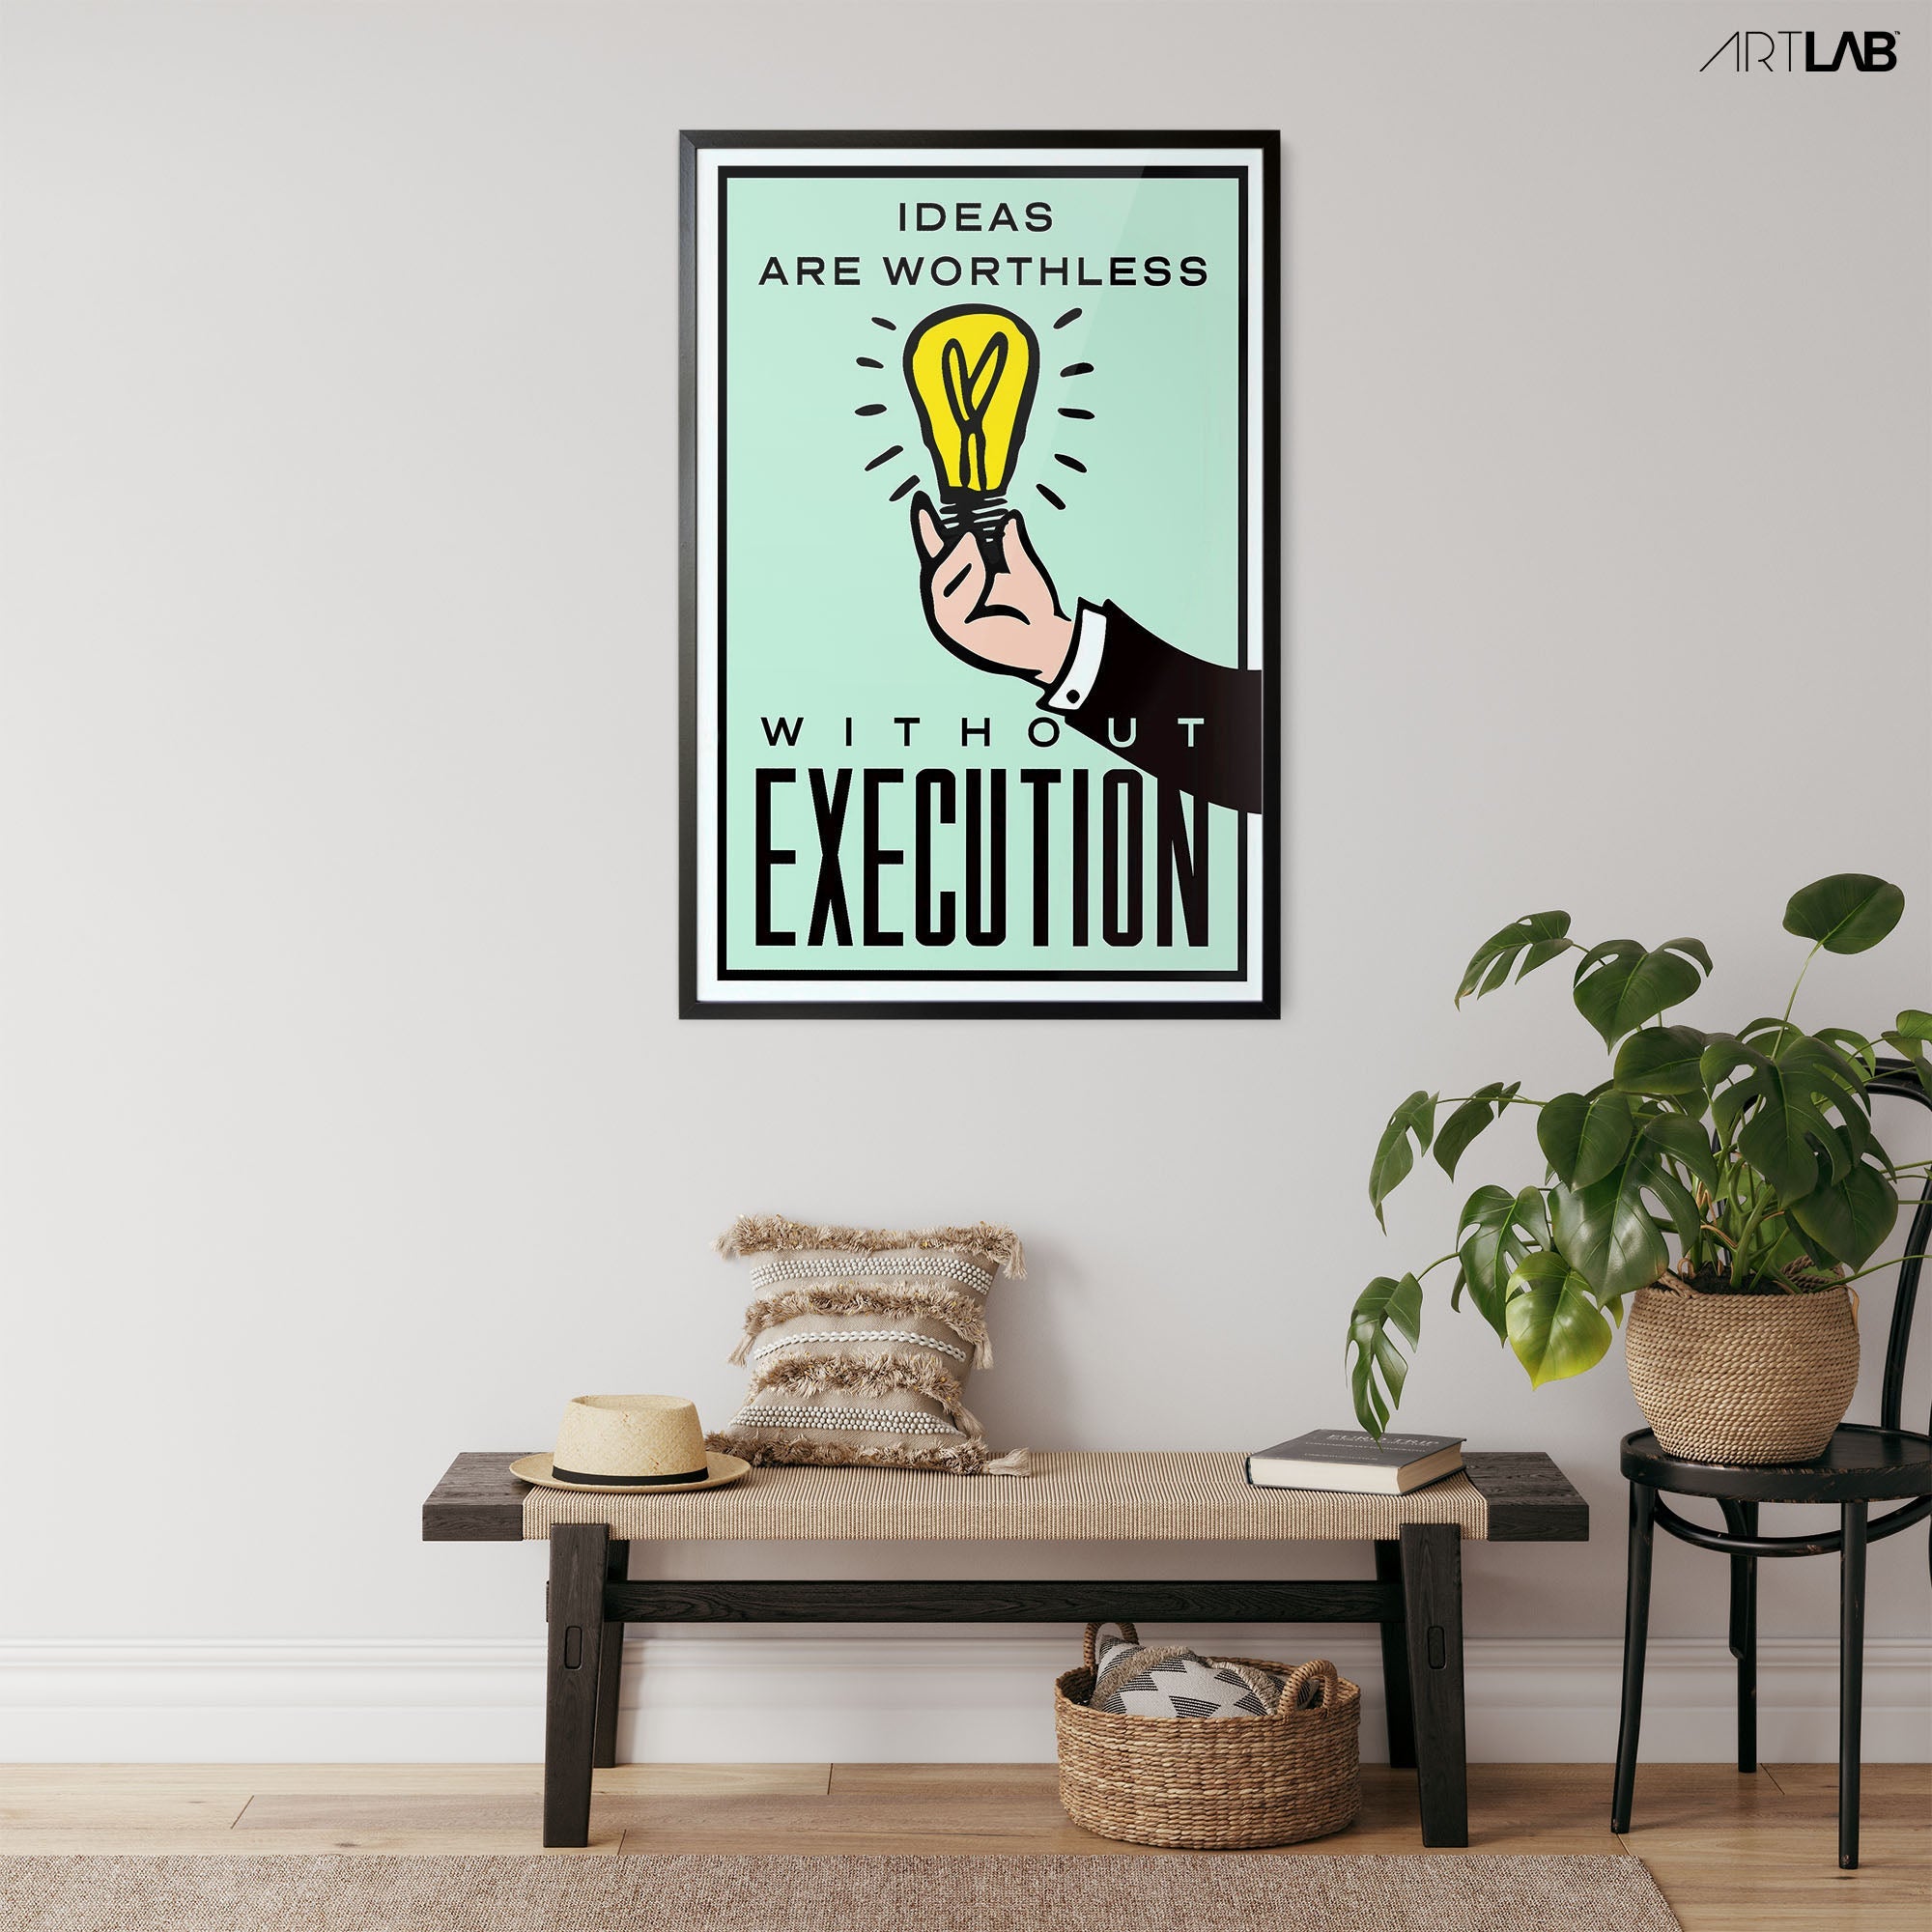 Without Execution